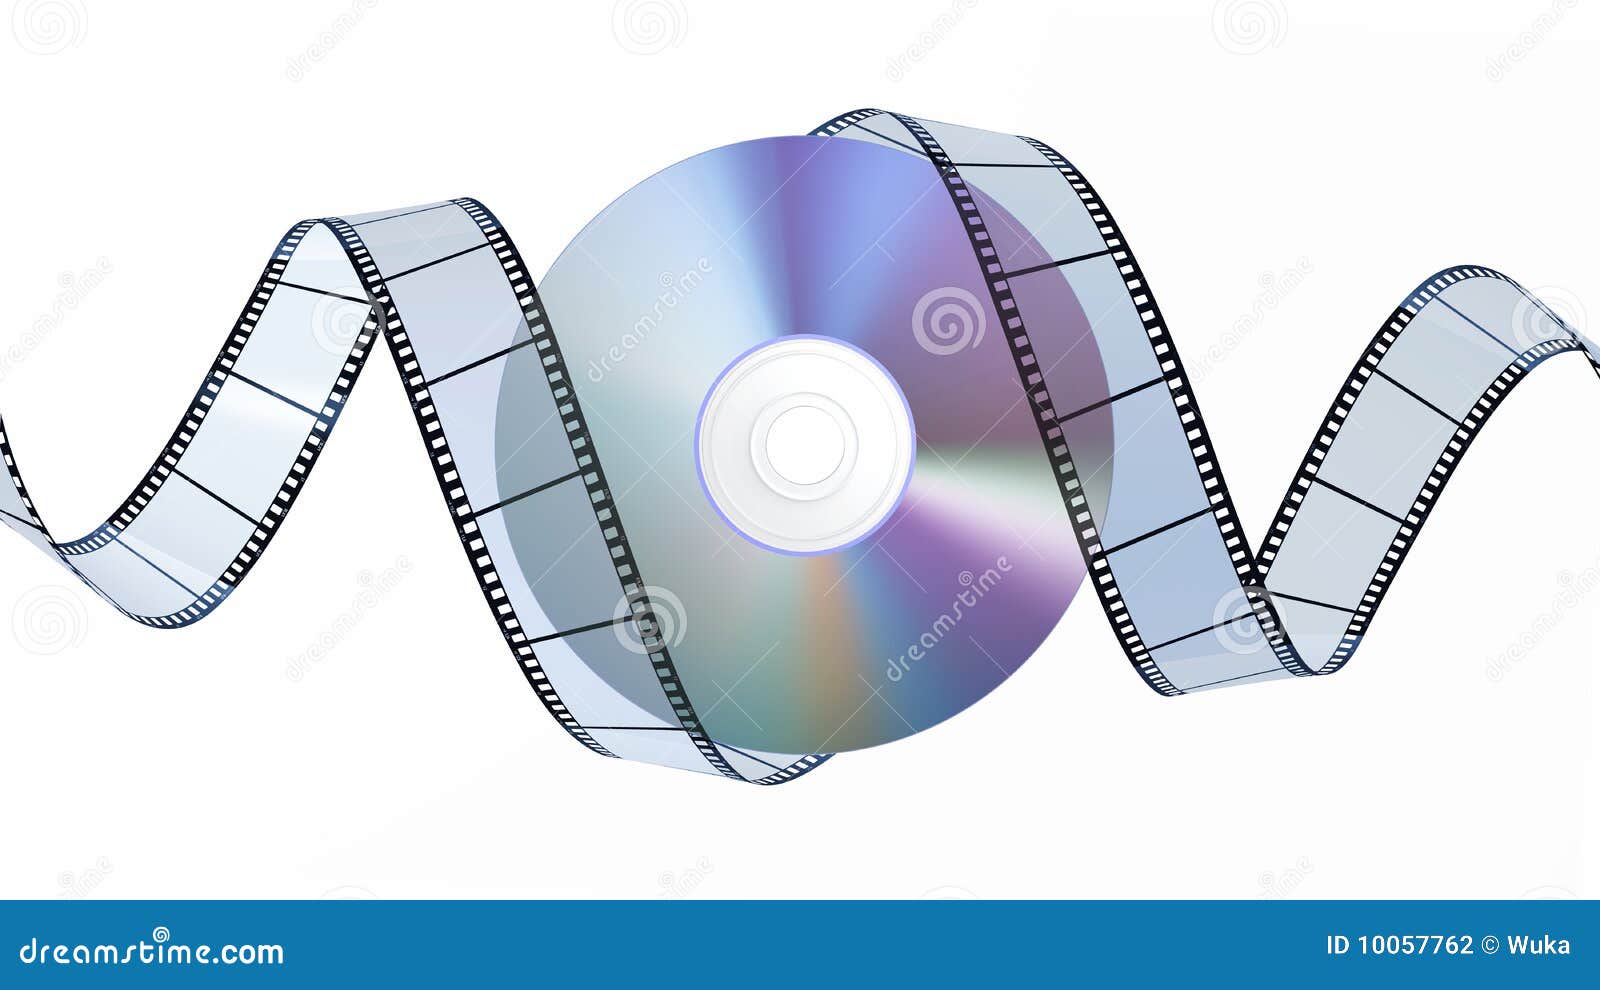 clipart movie covers - photo #38